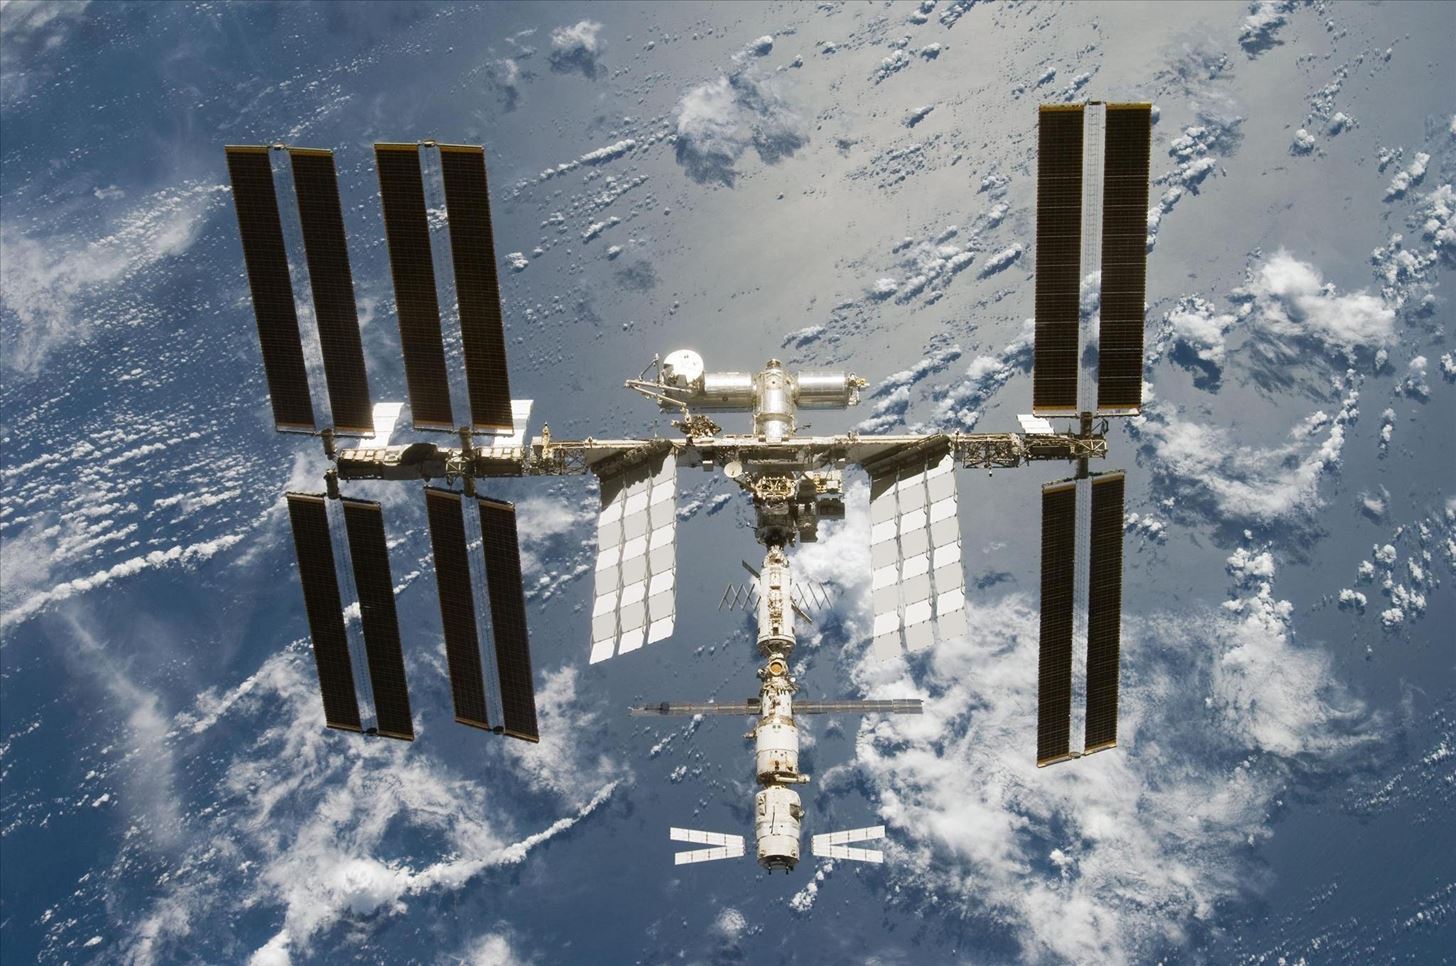 Help NASA Write Code to Fix the International Space Station and You Could Win $10,000!